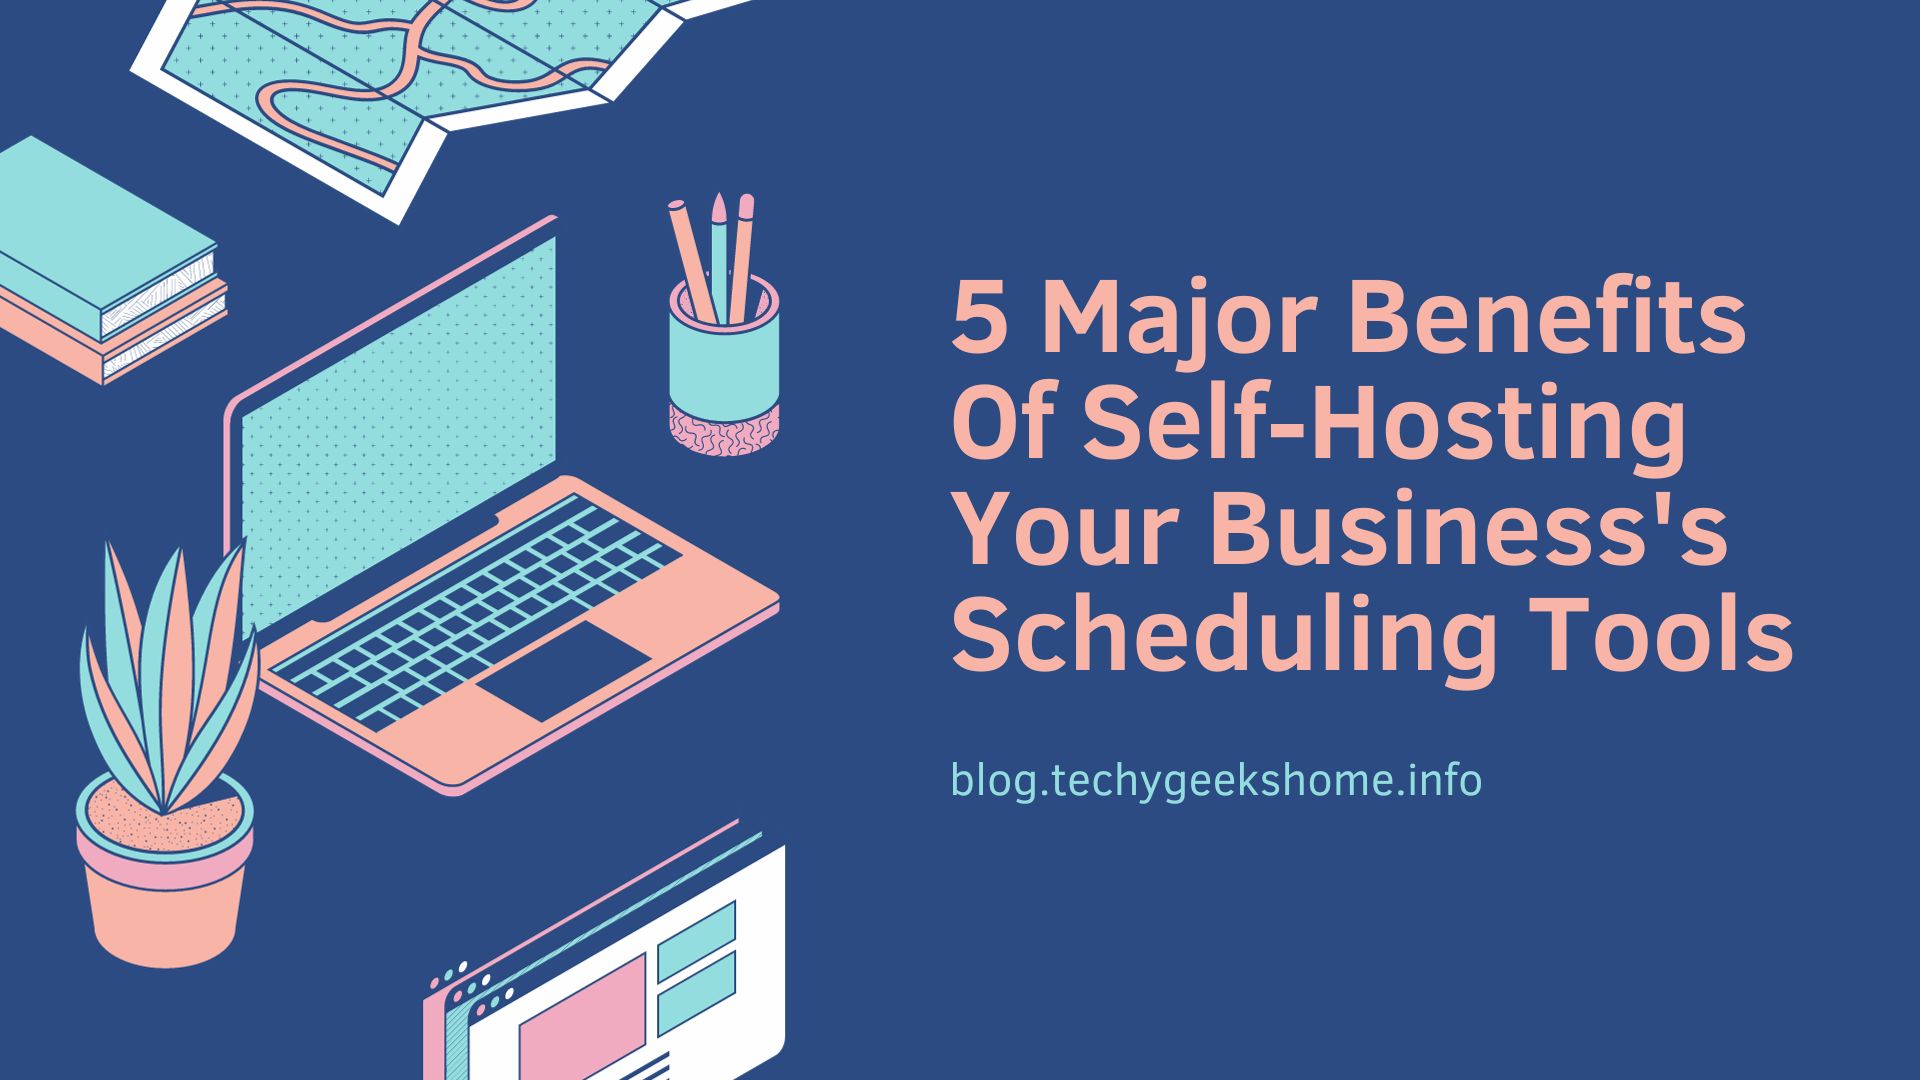 5 Major Benefits Of Self-Hosting Your Business's Scheduling Tools